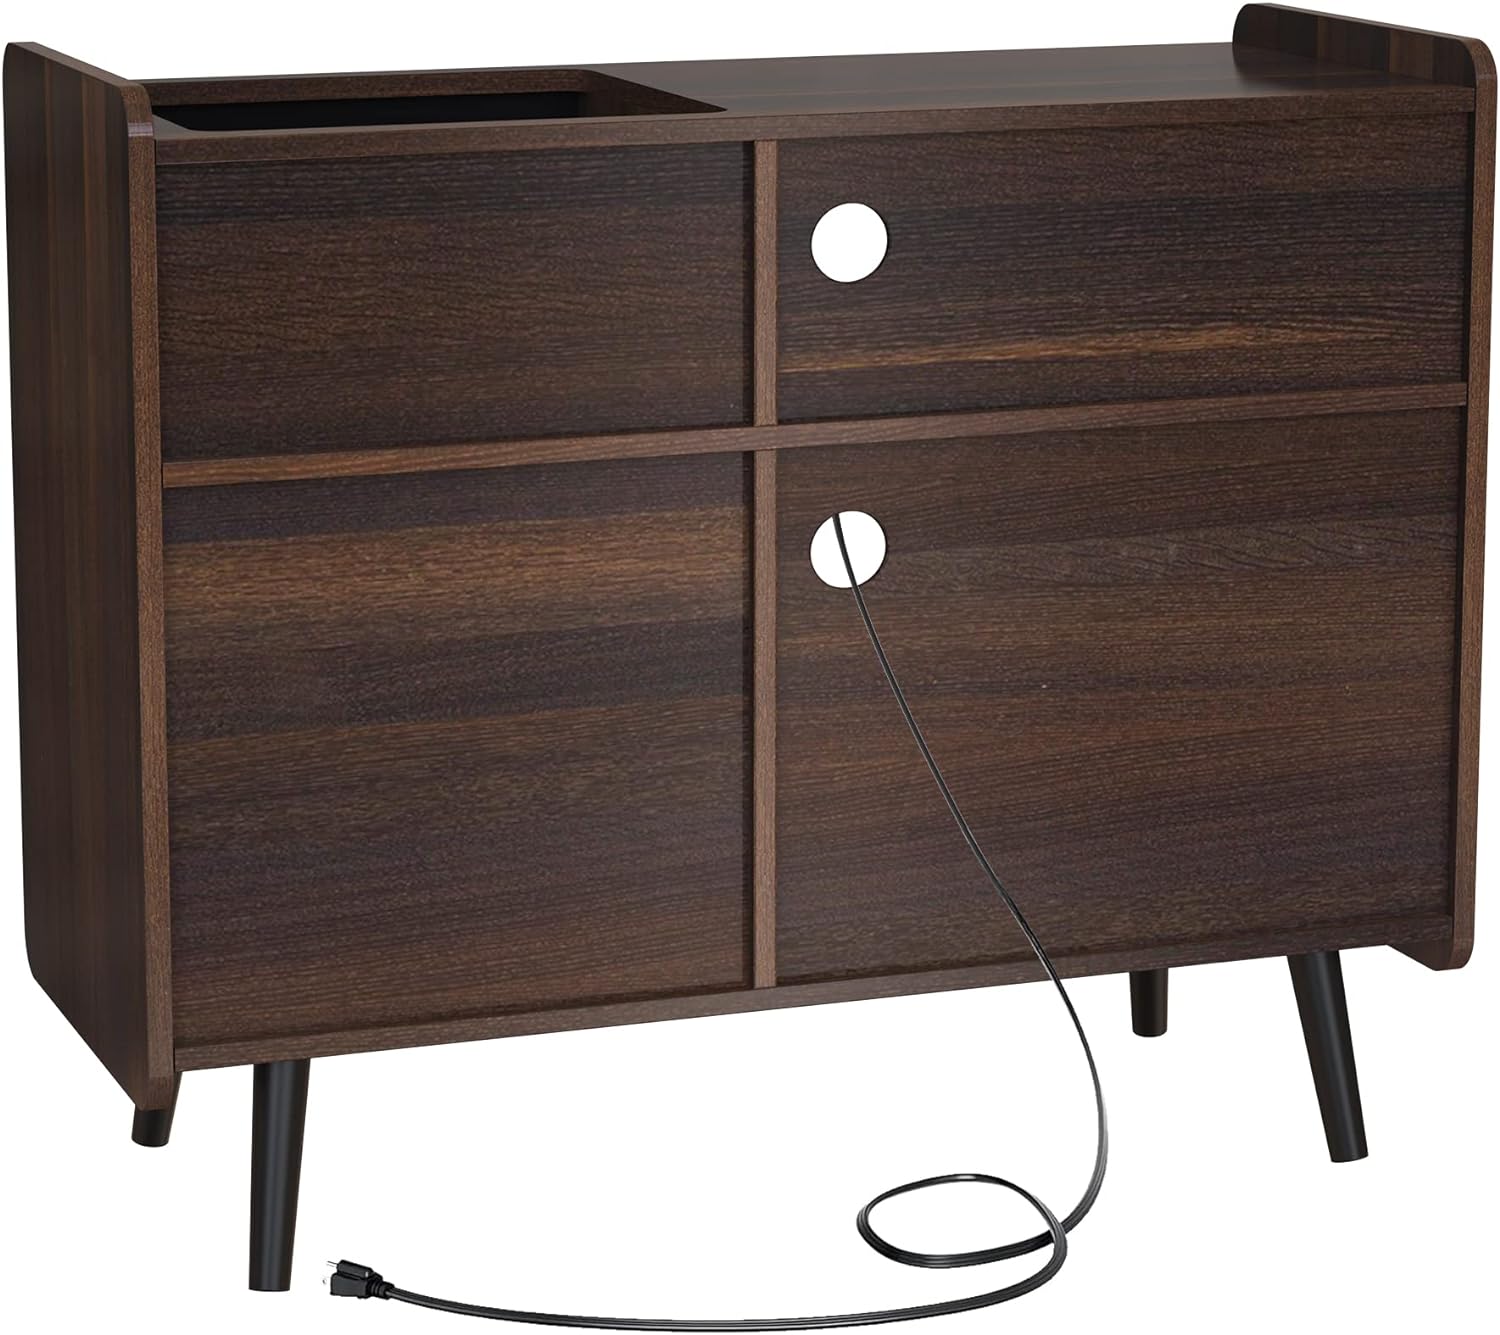 https://bigbigmart.com/wp-content/uploads/2023/09/GDLF-Large-Record-Player-Stand-Vinyl-Record-Storage-Cabinet-with-Power-Outlet-Record-Player-Table-Holds-up-to-350-Albums-Turntable-Stand-with-Wood-Legs-for-Living-RoomBedroomOffice...jpg